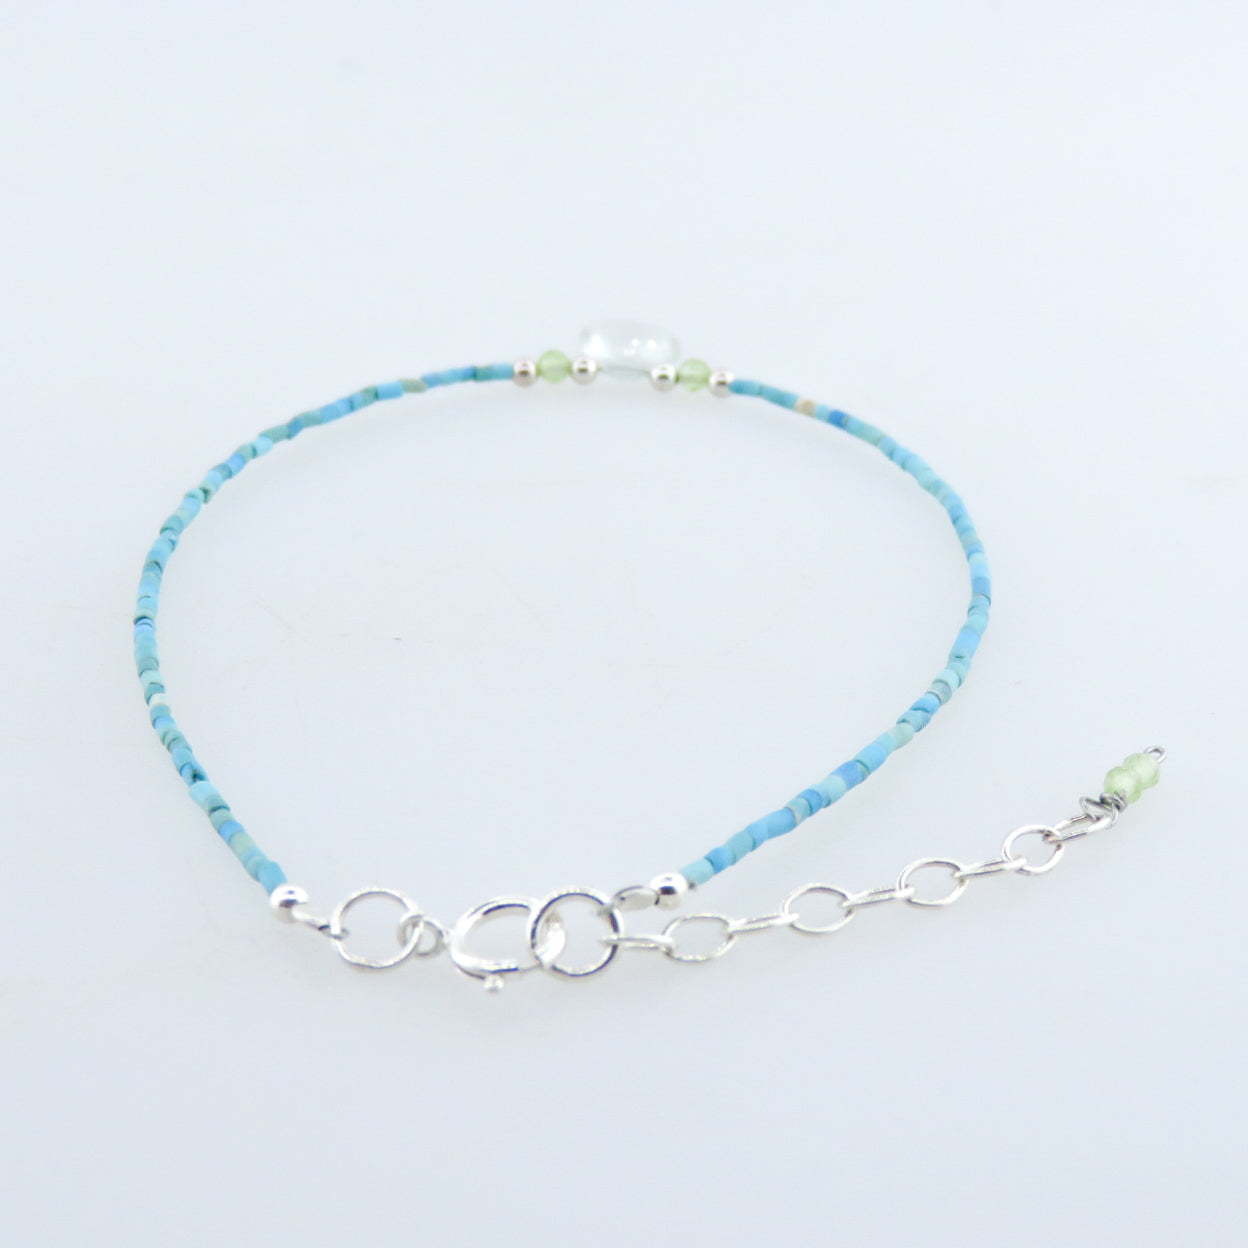 Turquoise Bracelet with  Blue Topaz and Silver Beads